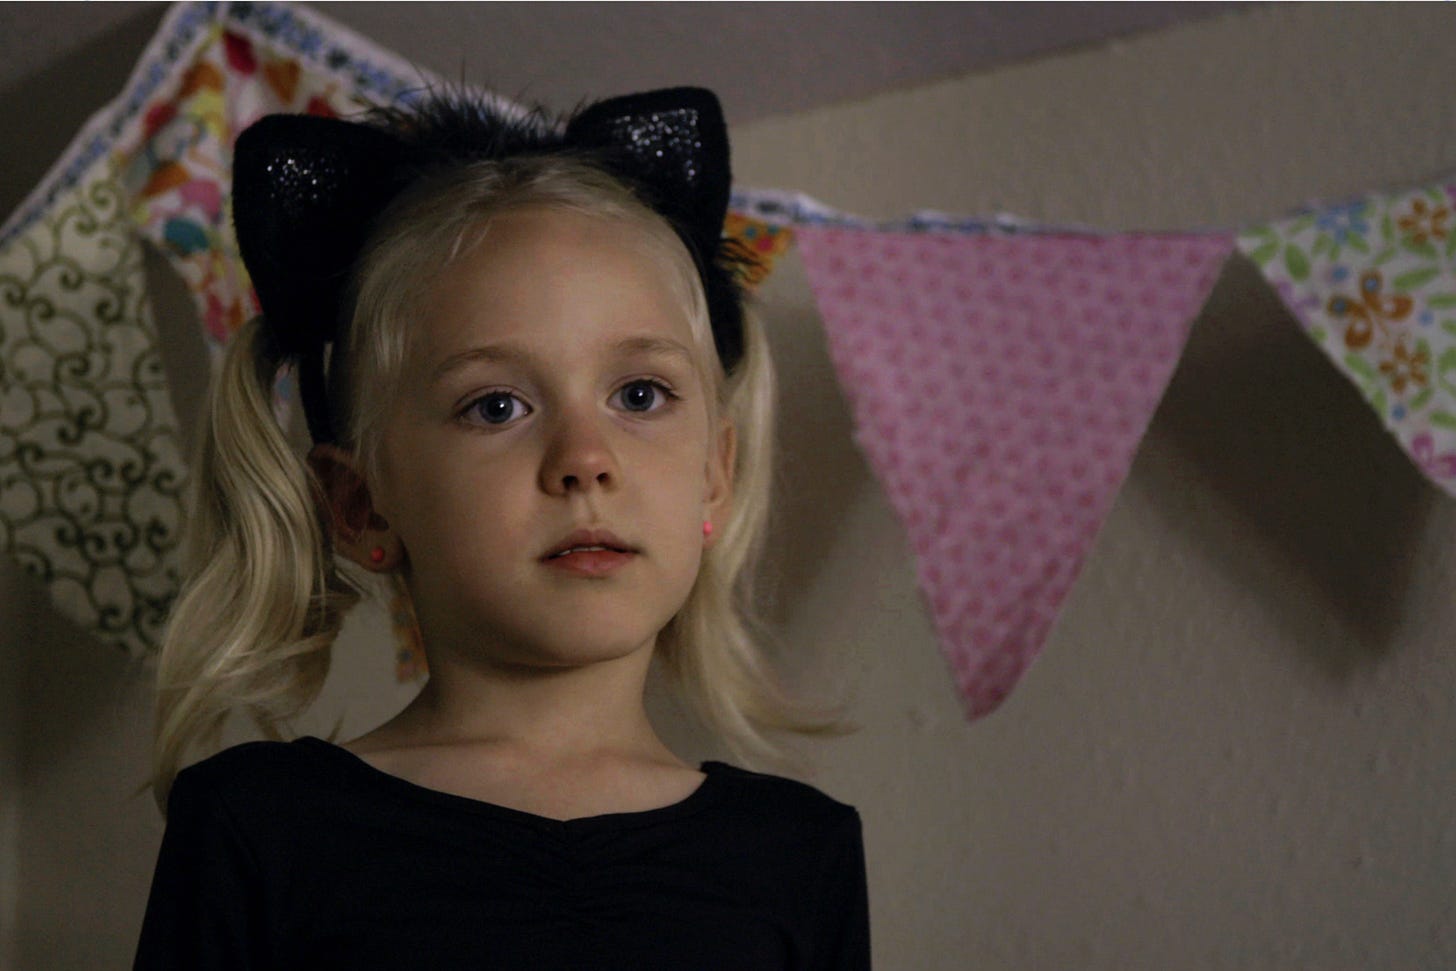 Watch Our Emmy-Winning Short Documentary About a Transgender Texas Girl |  them.